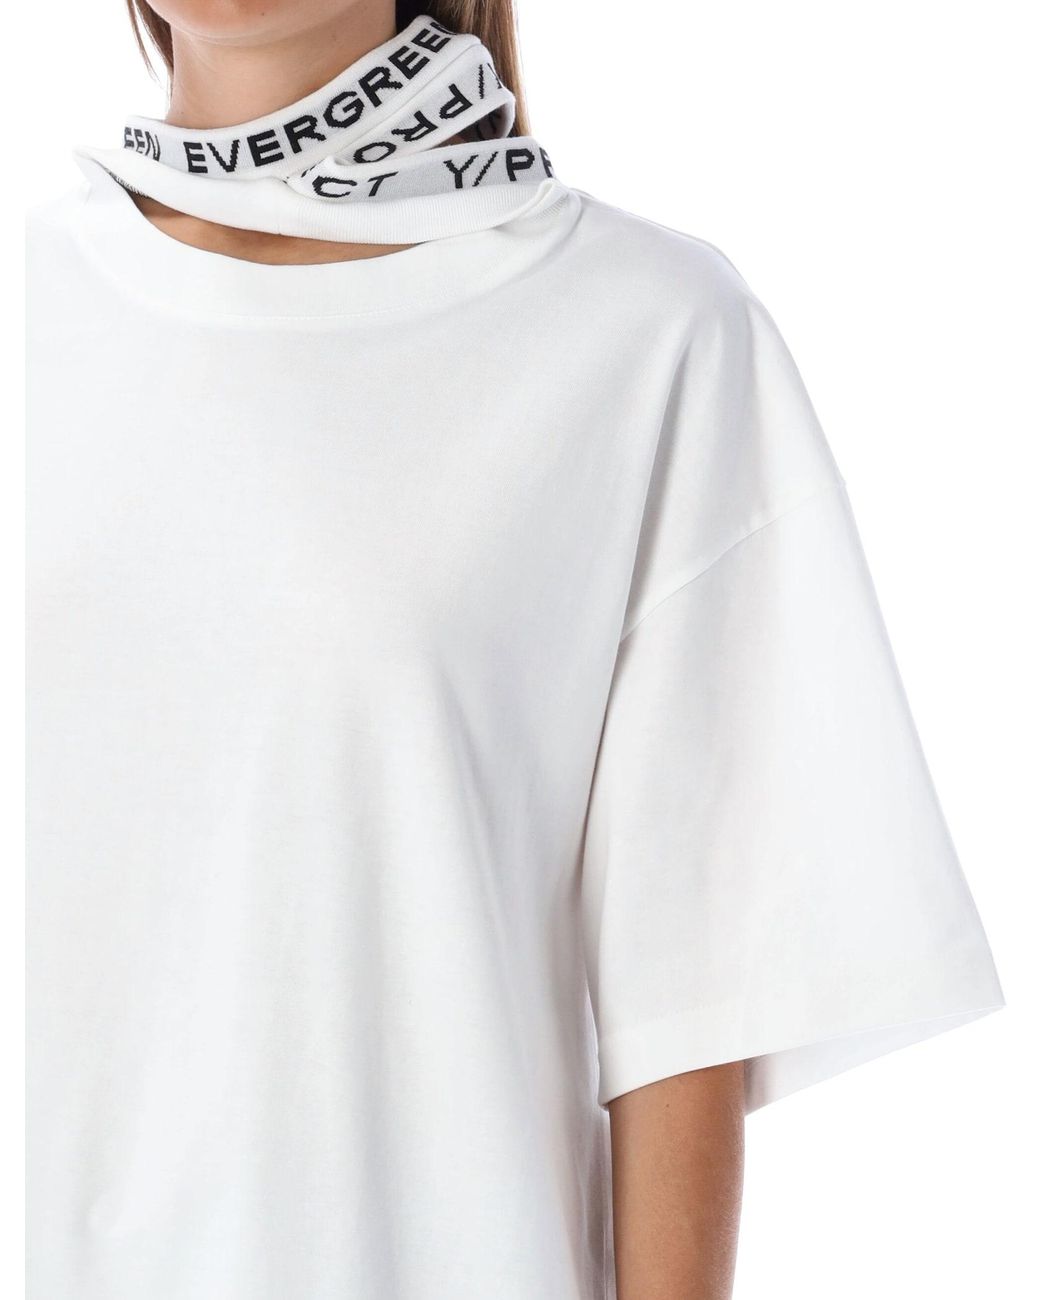 Y. Project Classic Three Collar T-shirt in White | Lyst